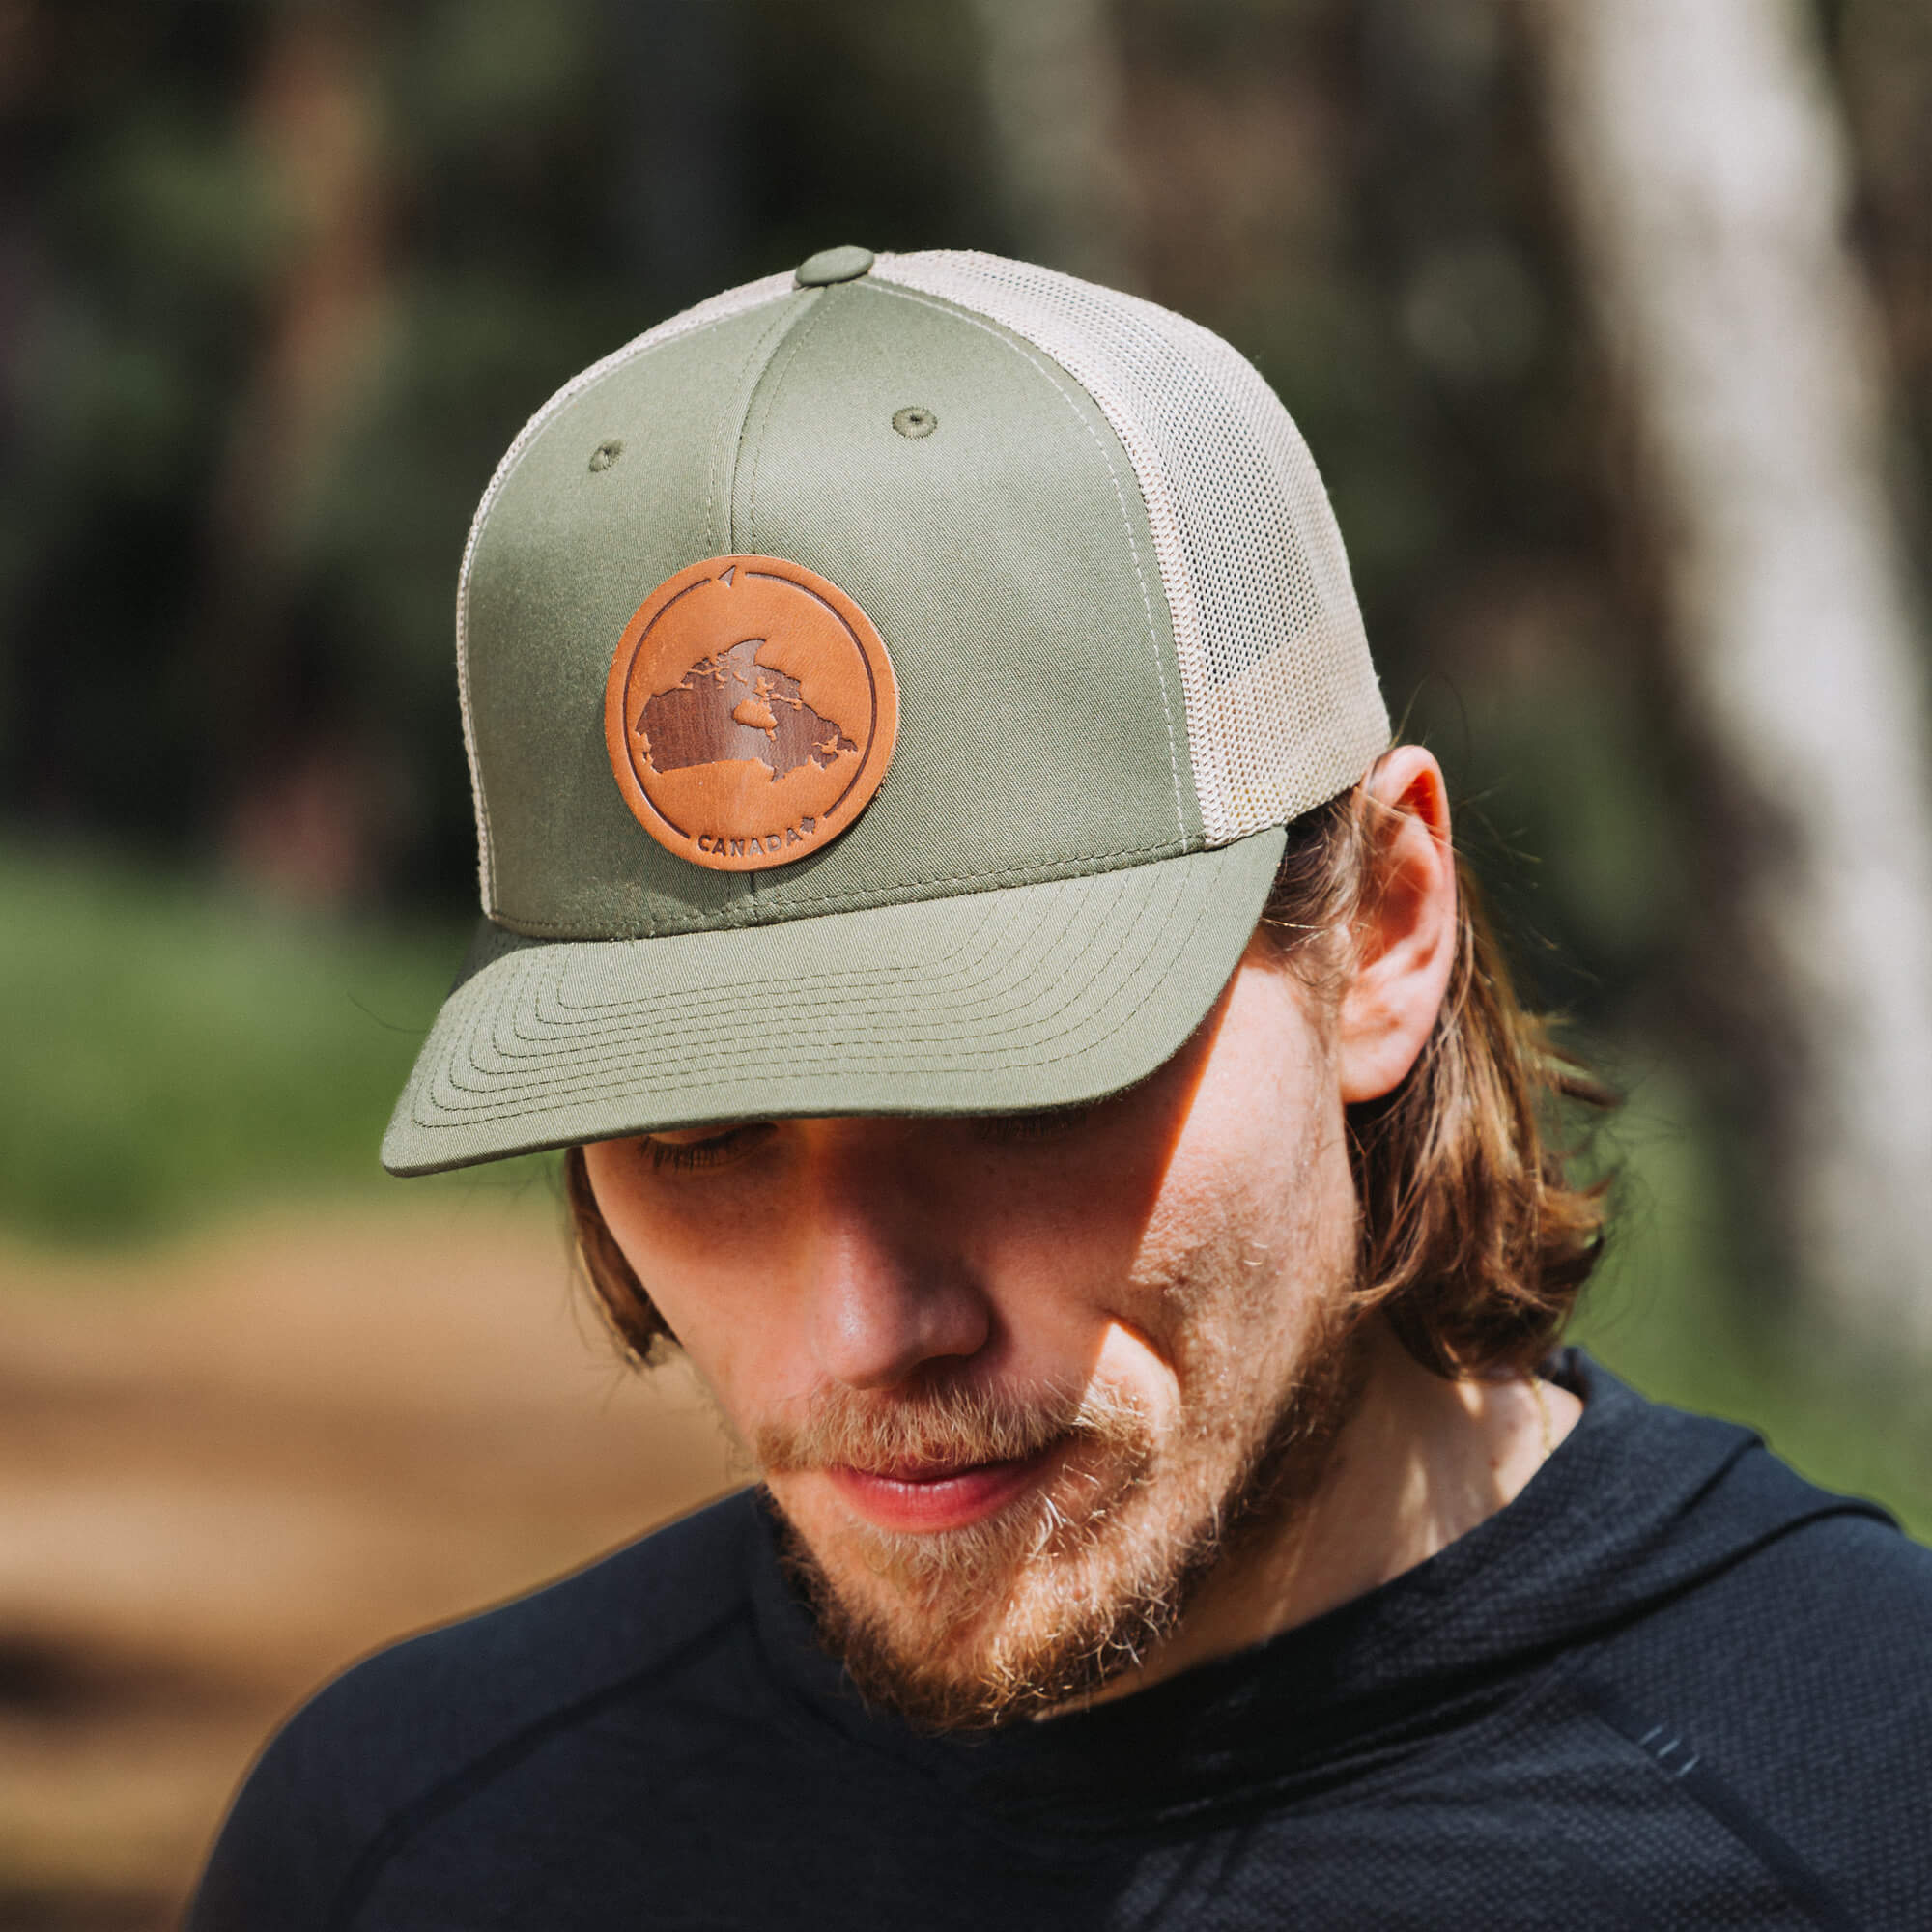 Moss Green and khaki trucker hat with full-grain leather patch of Canada | BLACK-002-002, CHARC-002-002, NAVY-002-002, HGREY-002-002, MOSS-002-002, BROWN-002-002, RED-002-002